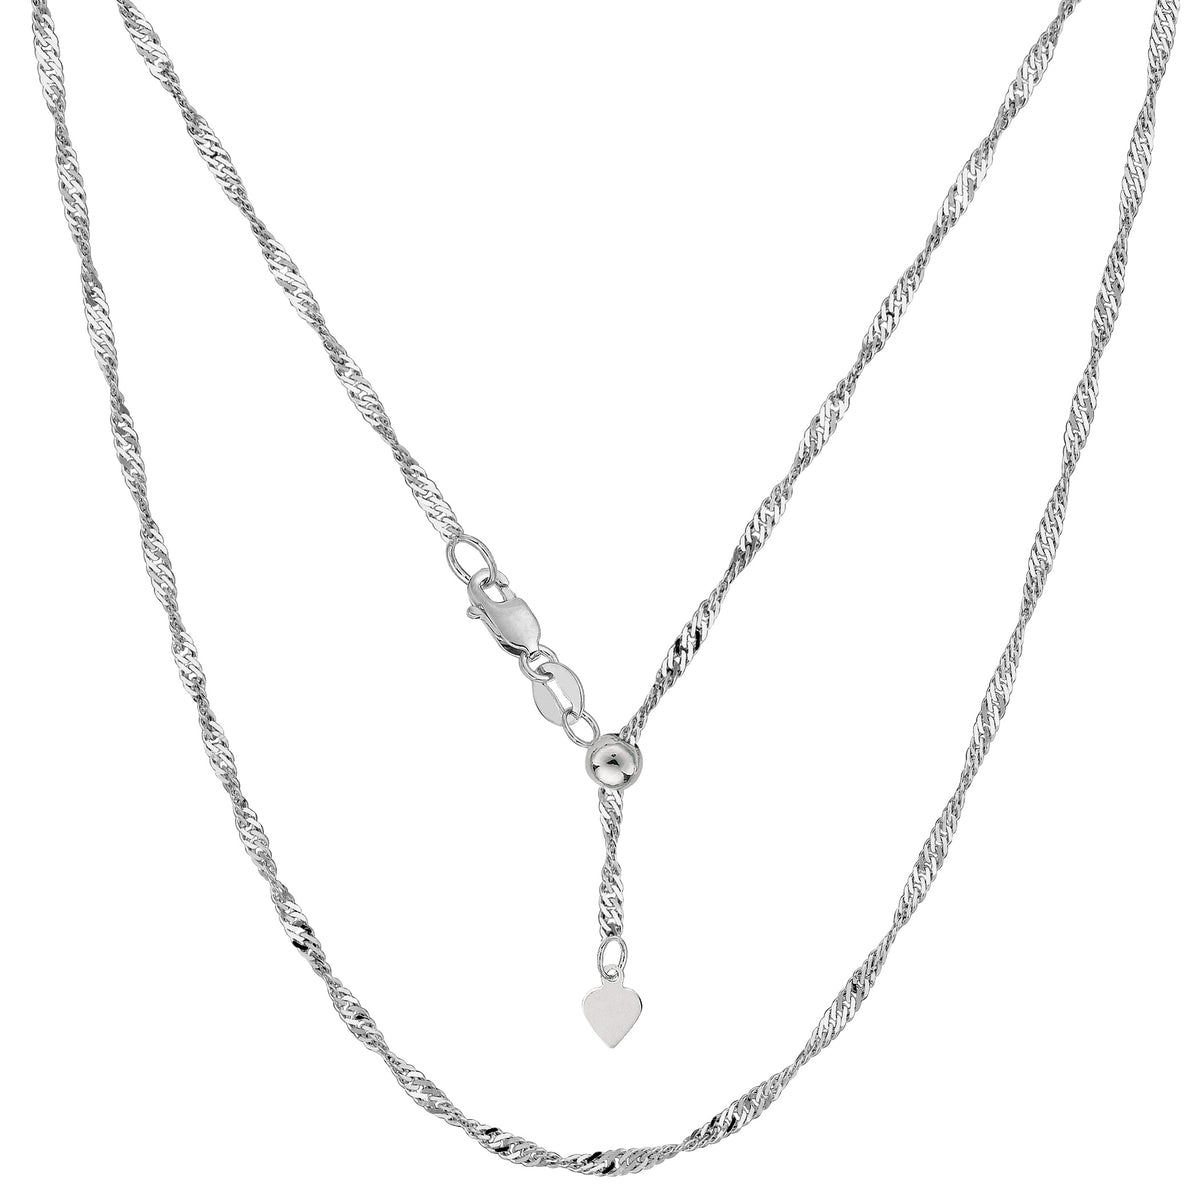 14k White Gold Adjustable Singapore Link Chain Necklace, 1.15mm, 22" fine designer jewelry for men and women